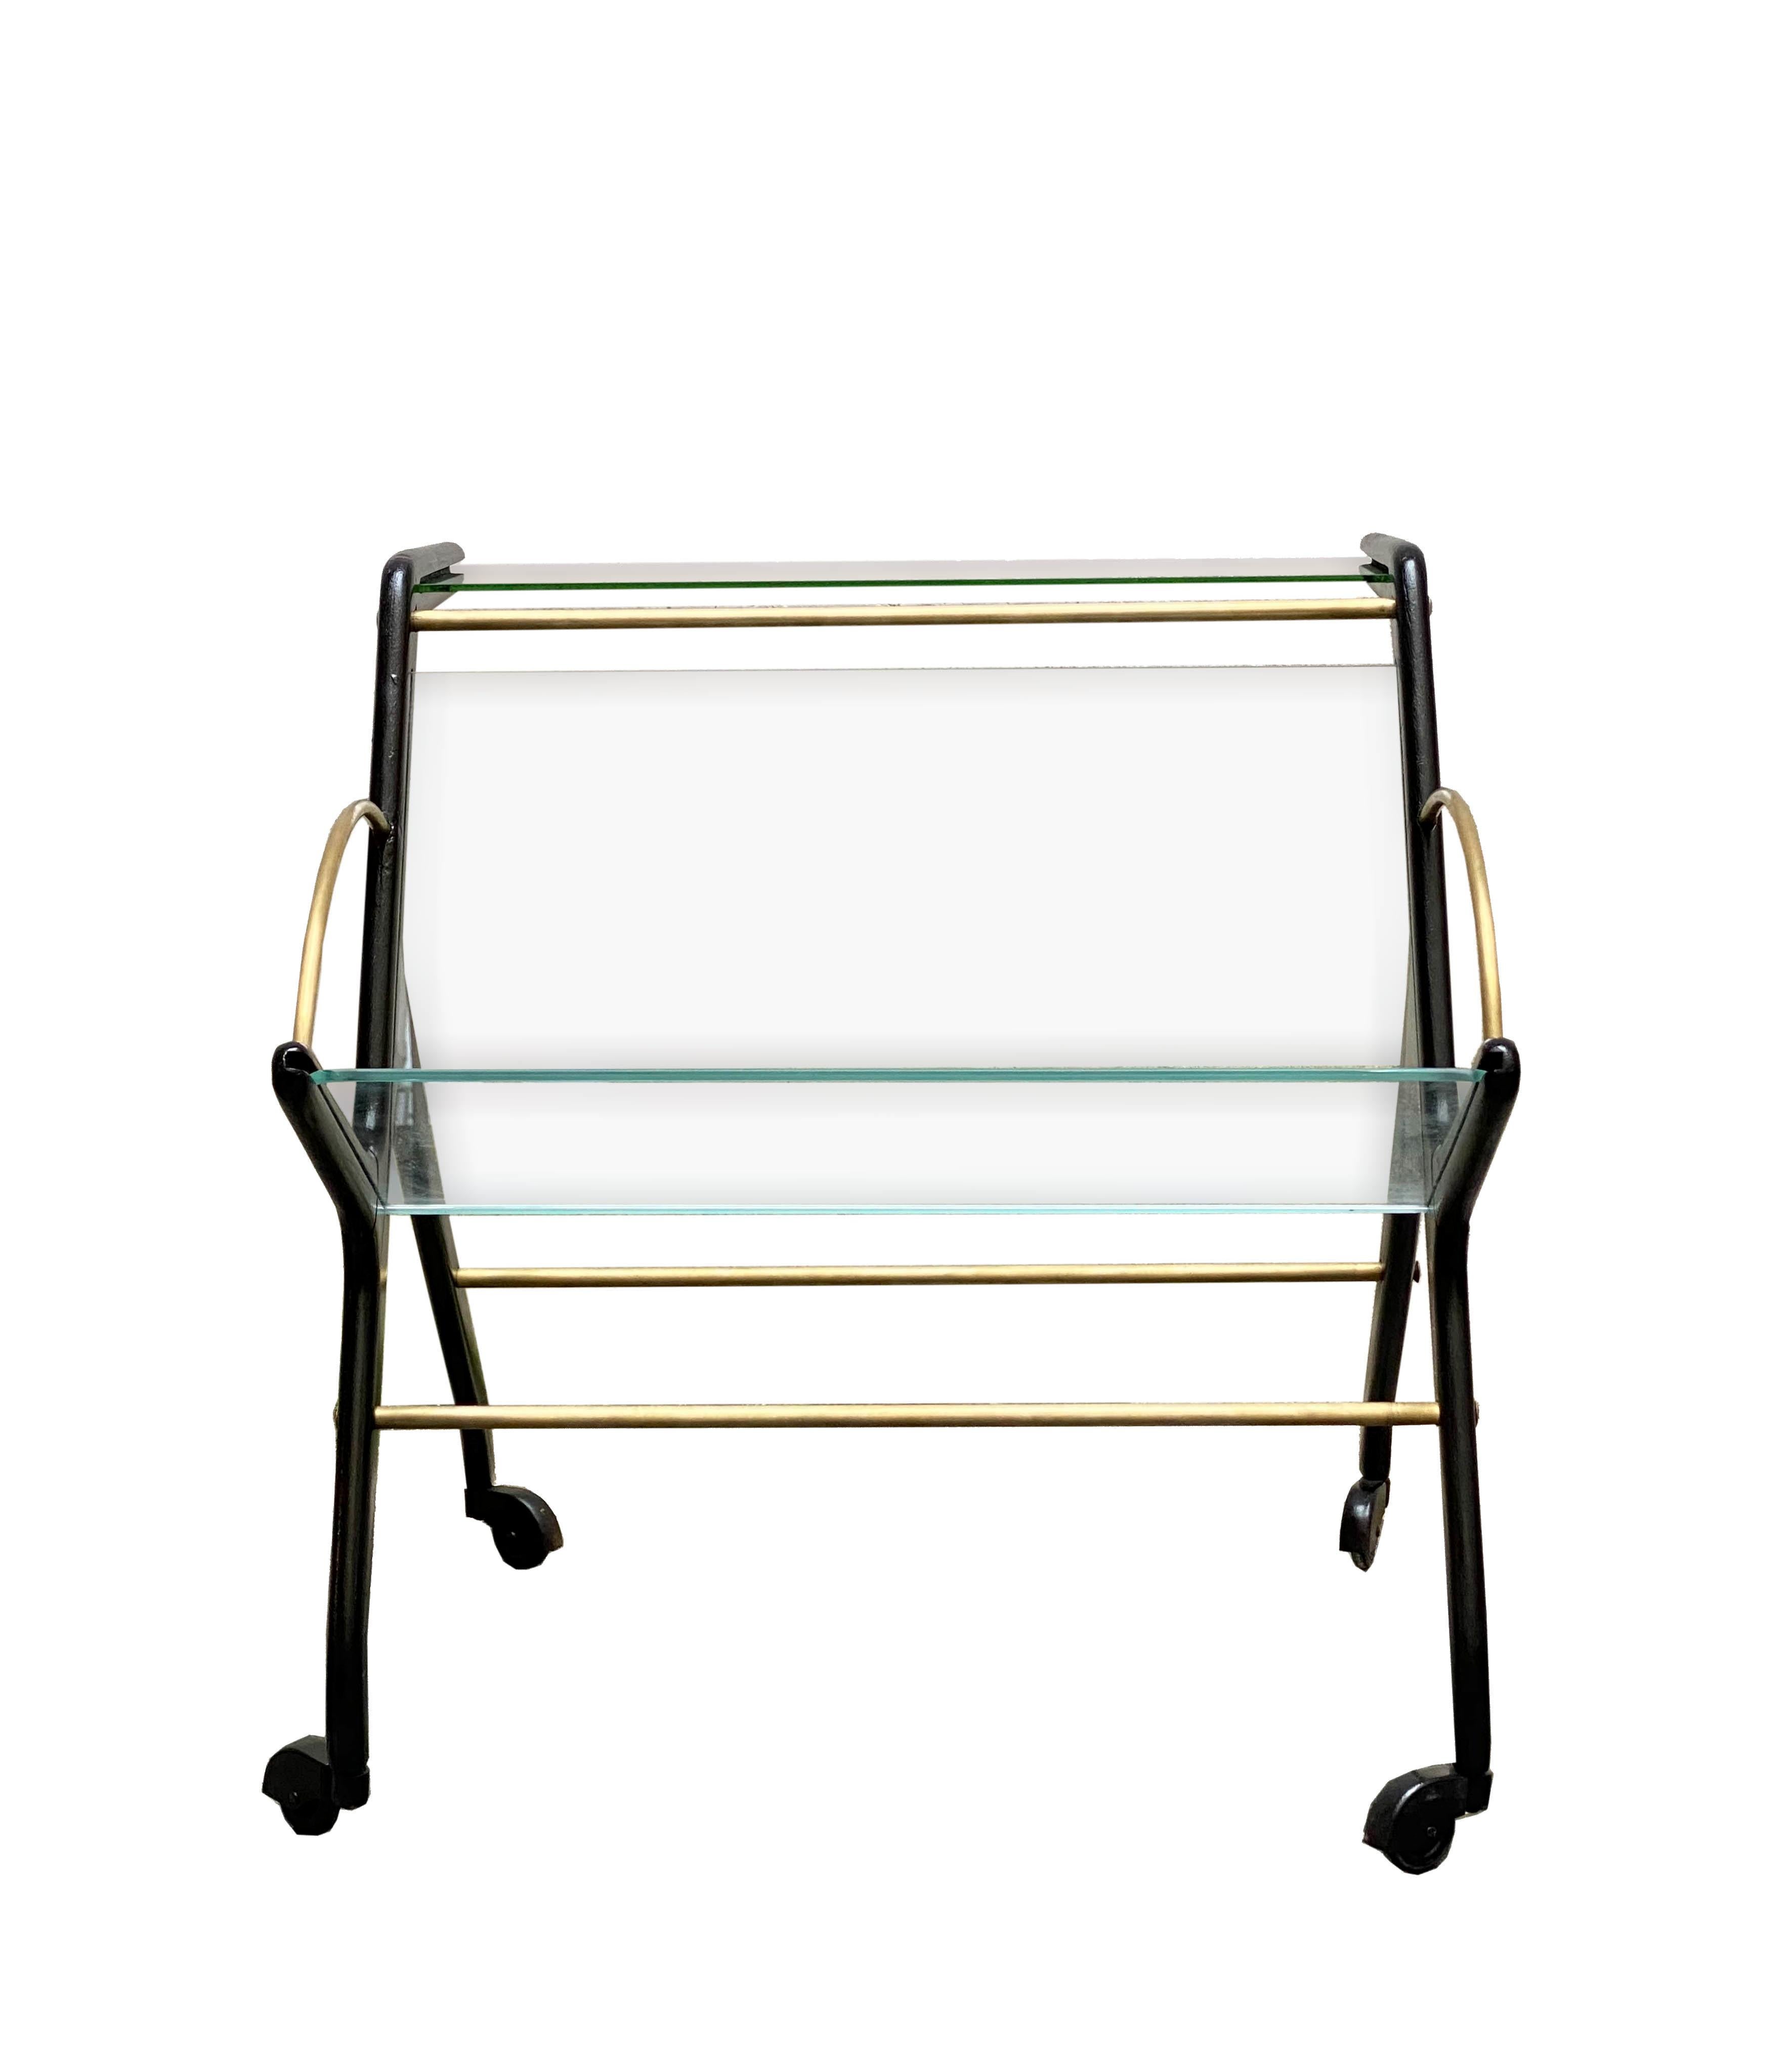 Adam Style Ico Parisi Glass and Wood Magazine Rack with Wheels, 1950s For Sale